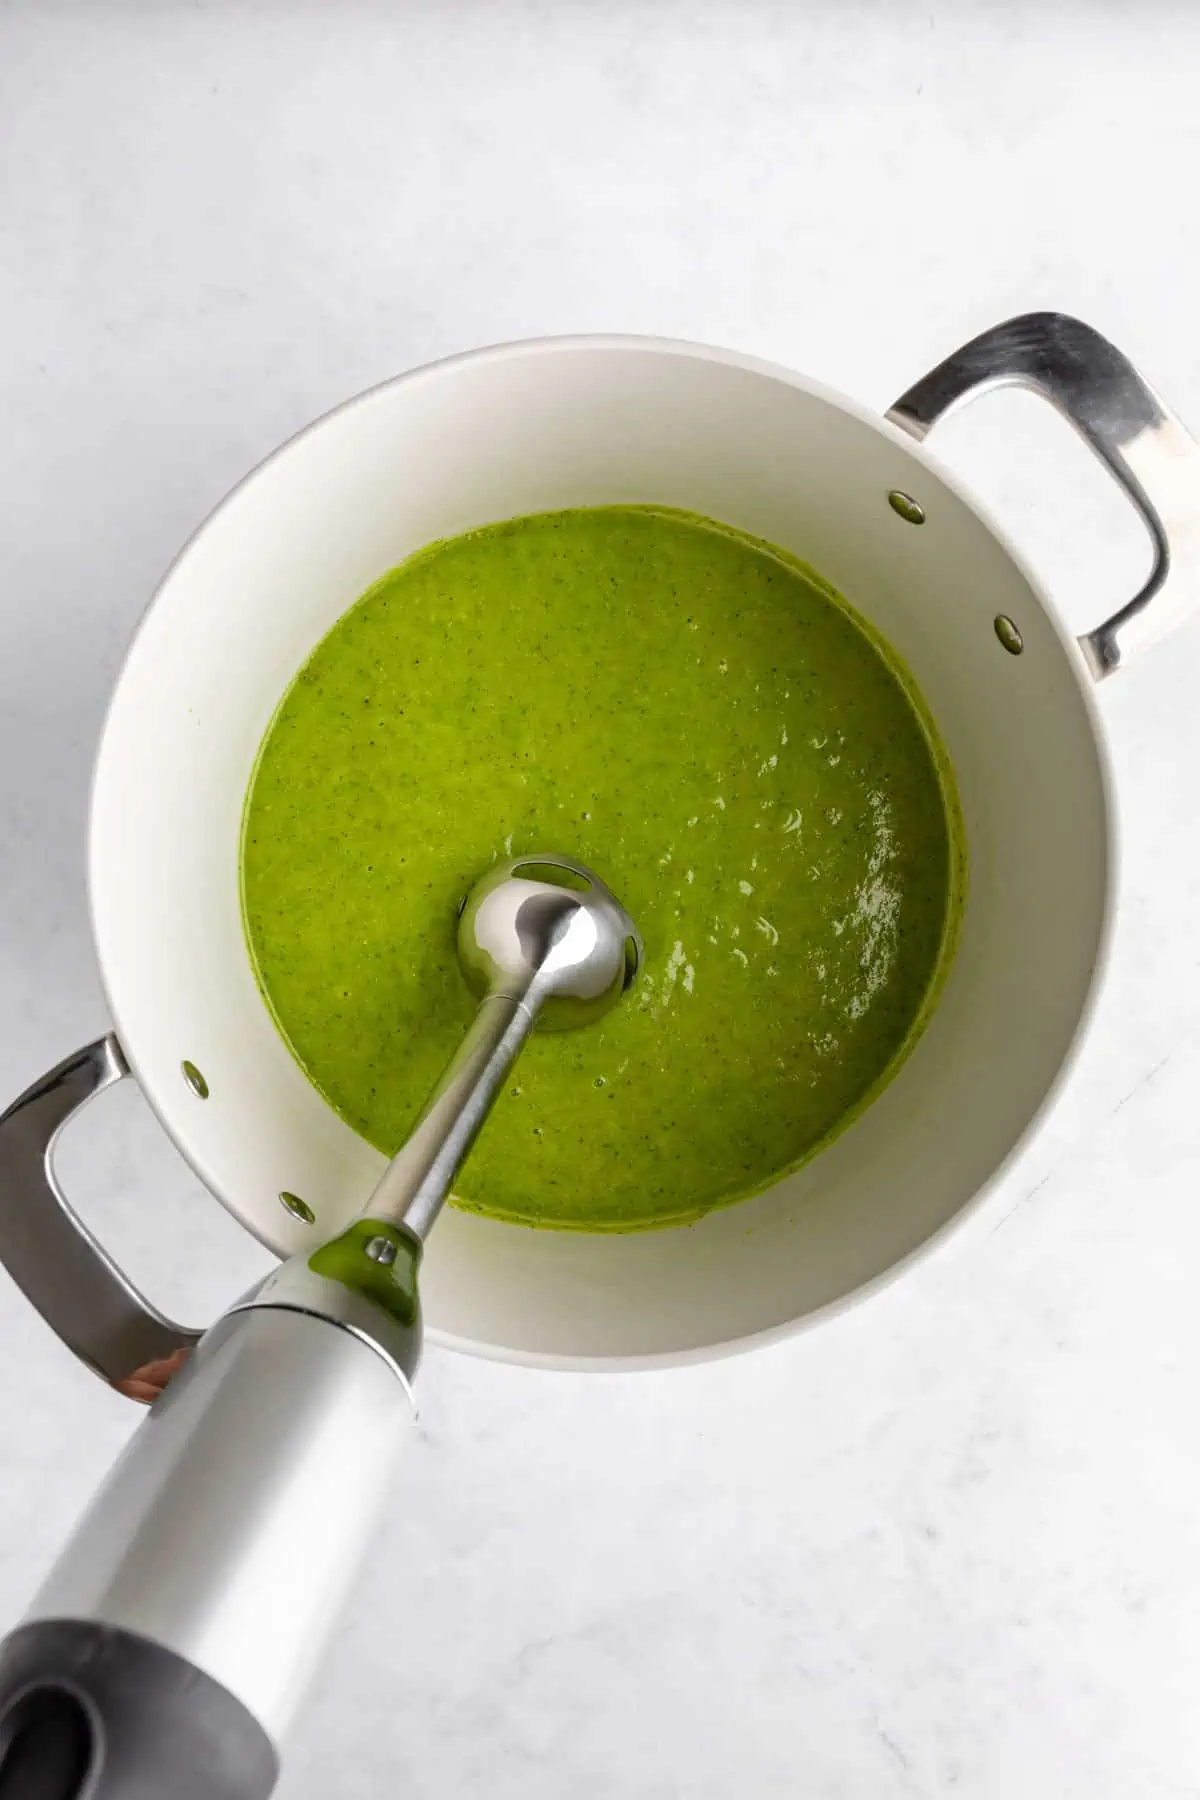 Blending the green pea soup with an immersion blender in a white pot.